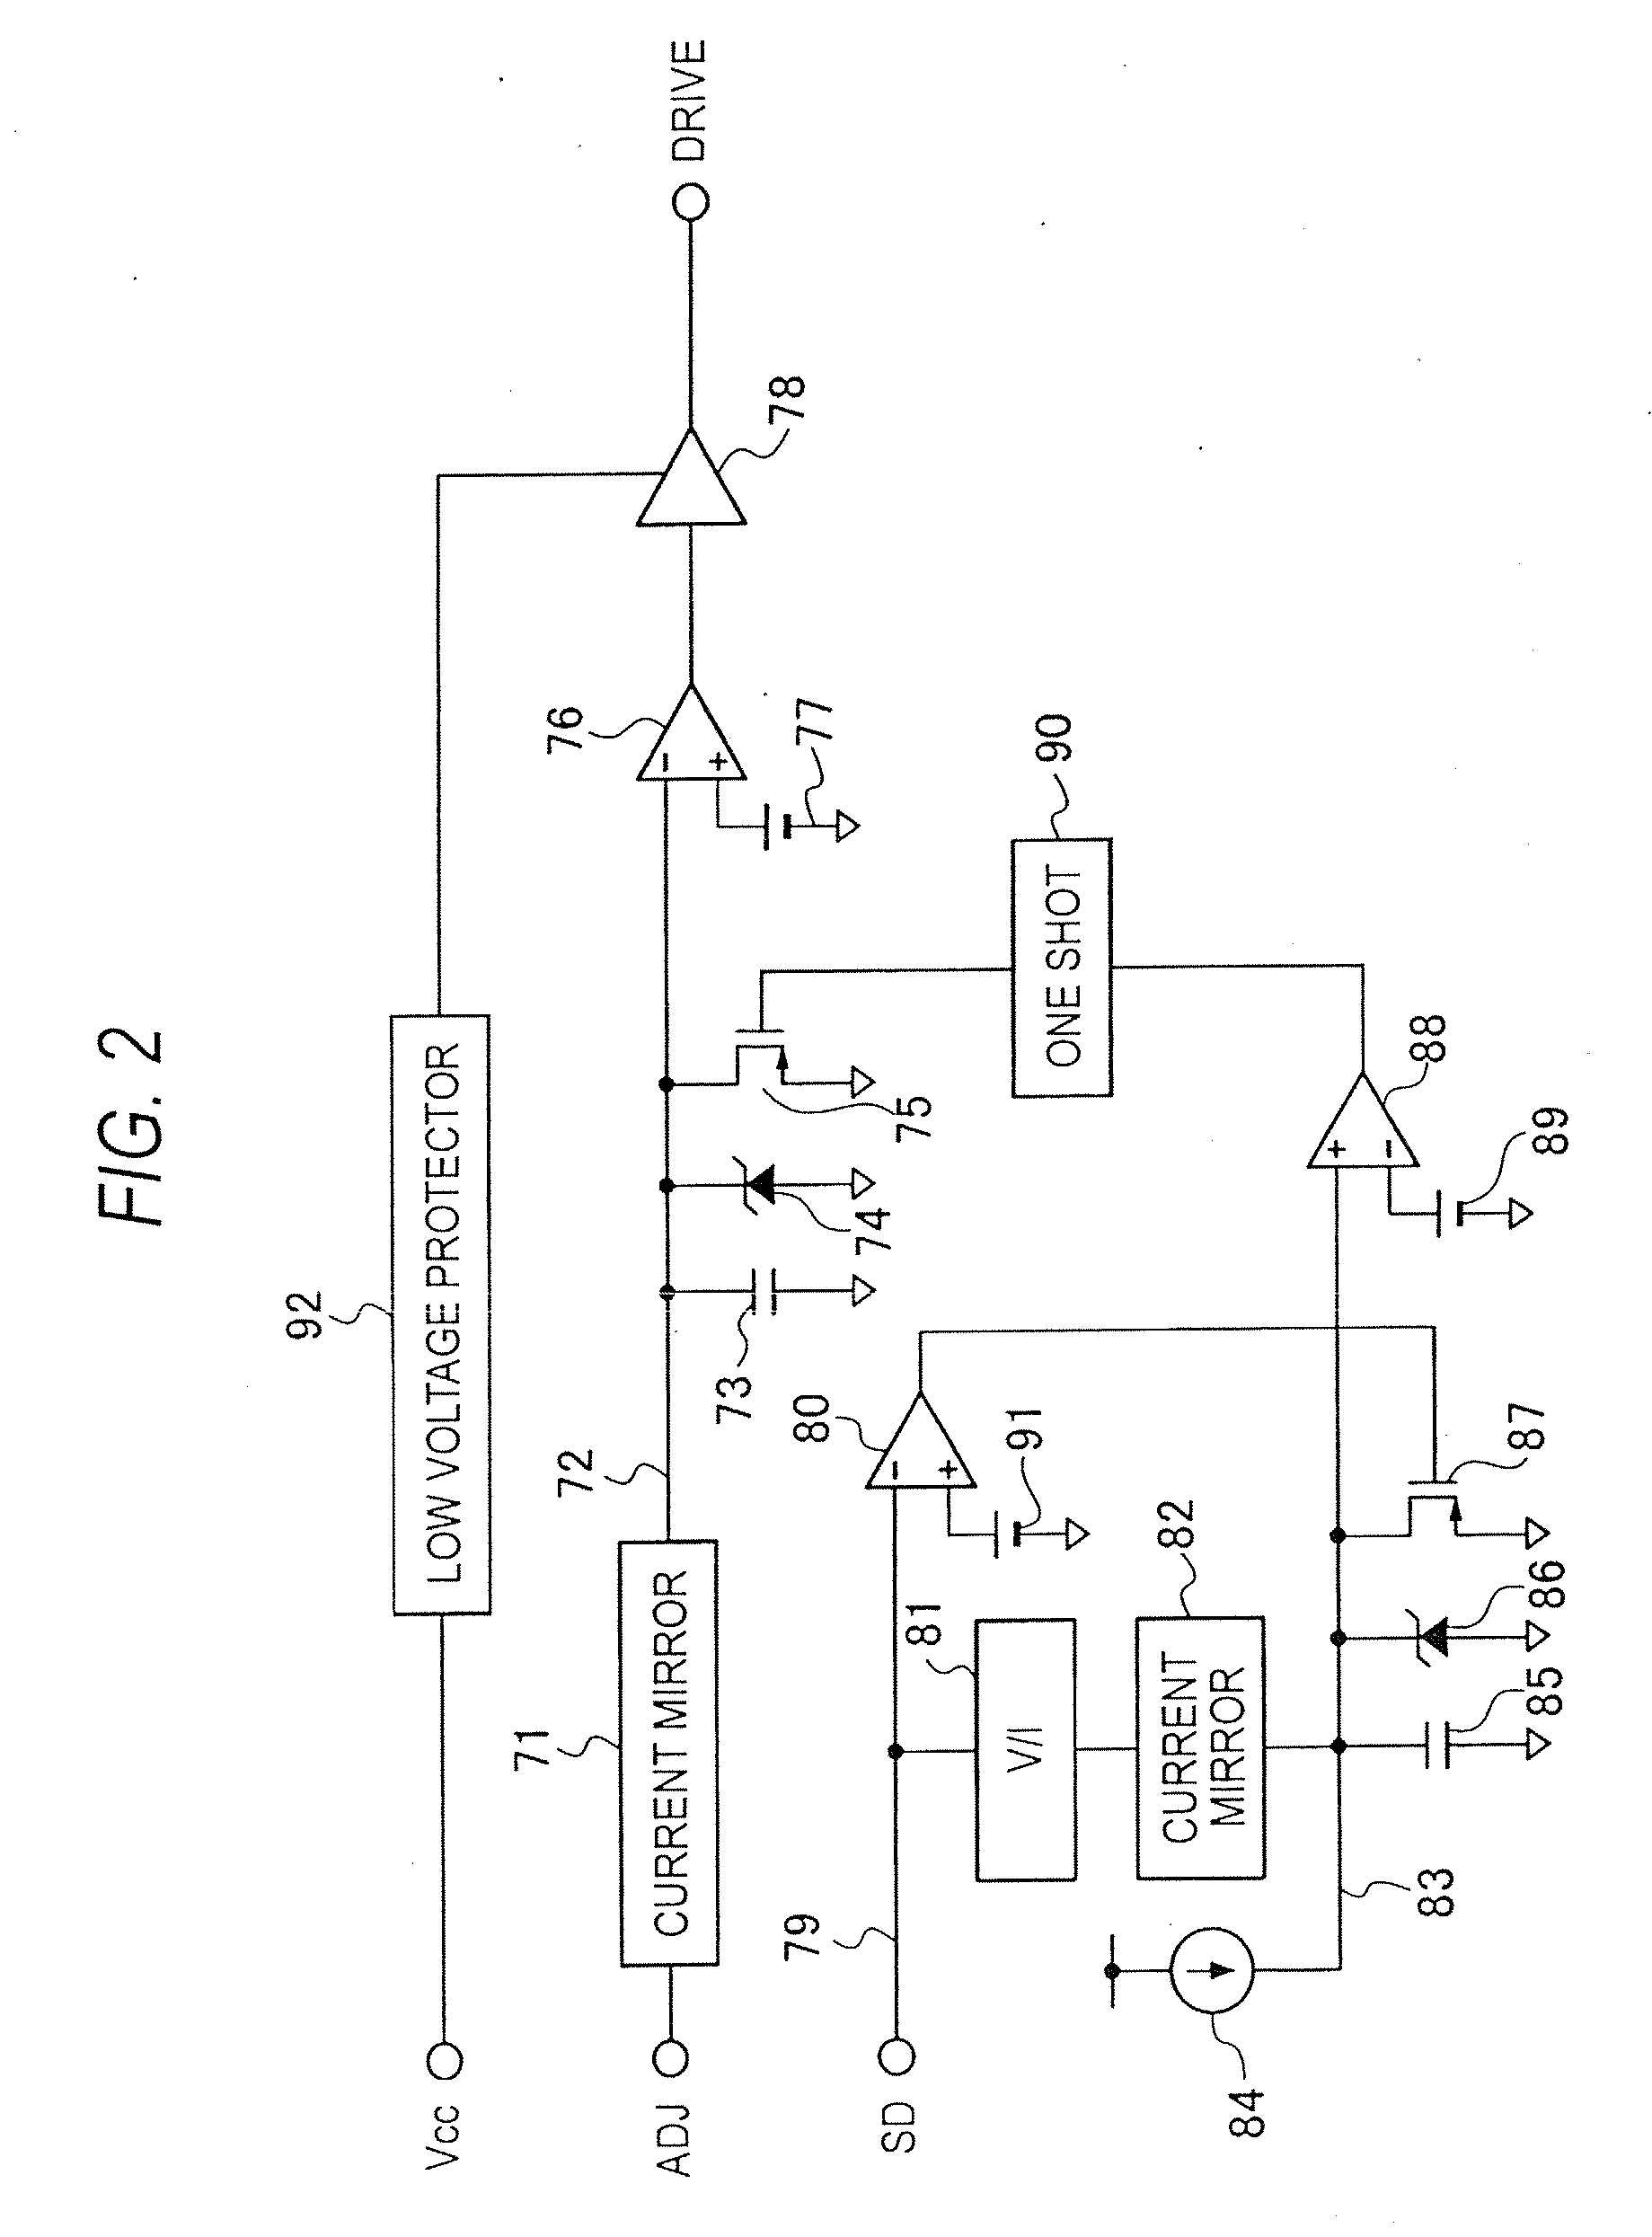 Active snubber circuit and power supply circuit